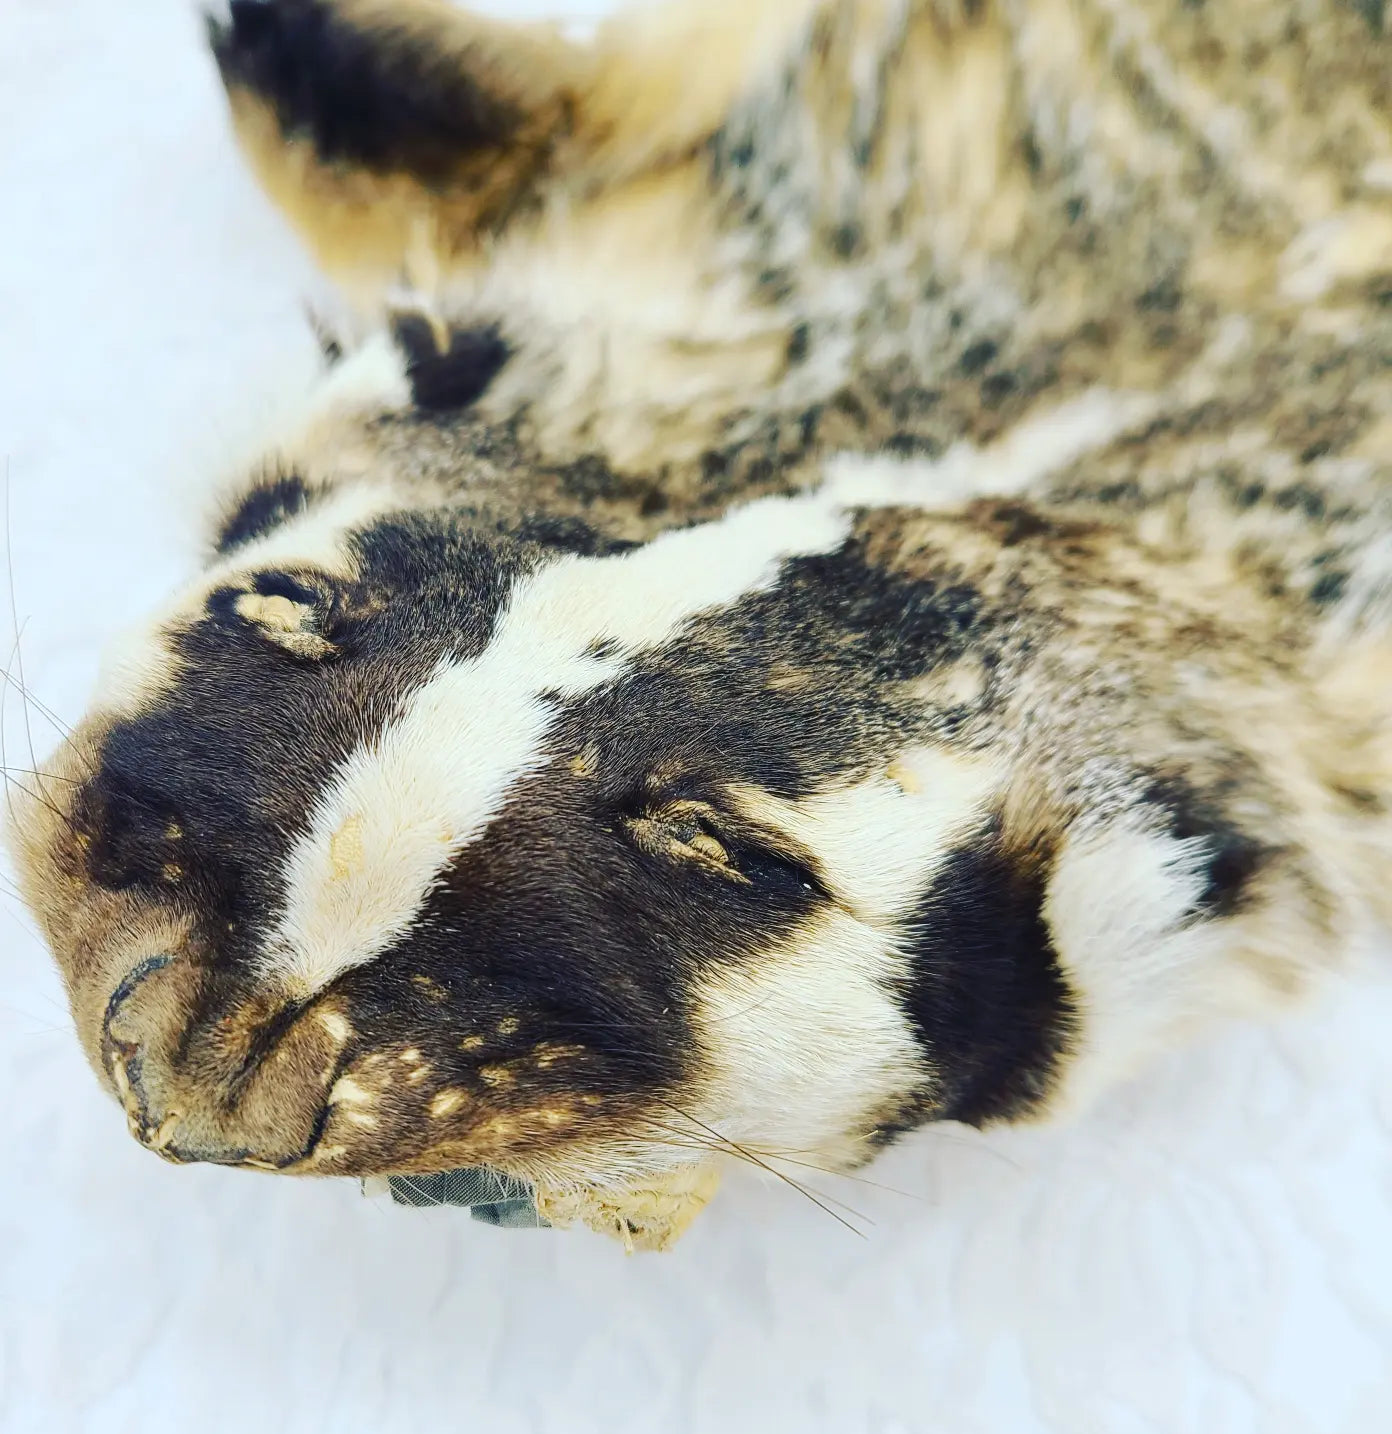 Vintage BADGER Taxidermy ~ Fully Tanned Pelt ~ HUGE BADGER FUR with HANDS AND FEET ~ Oddities ~ Weird Stuff